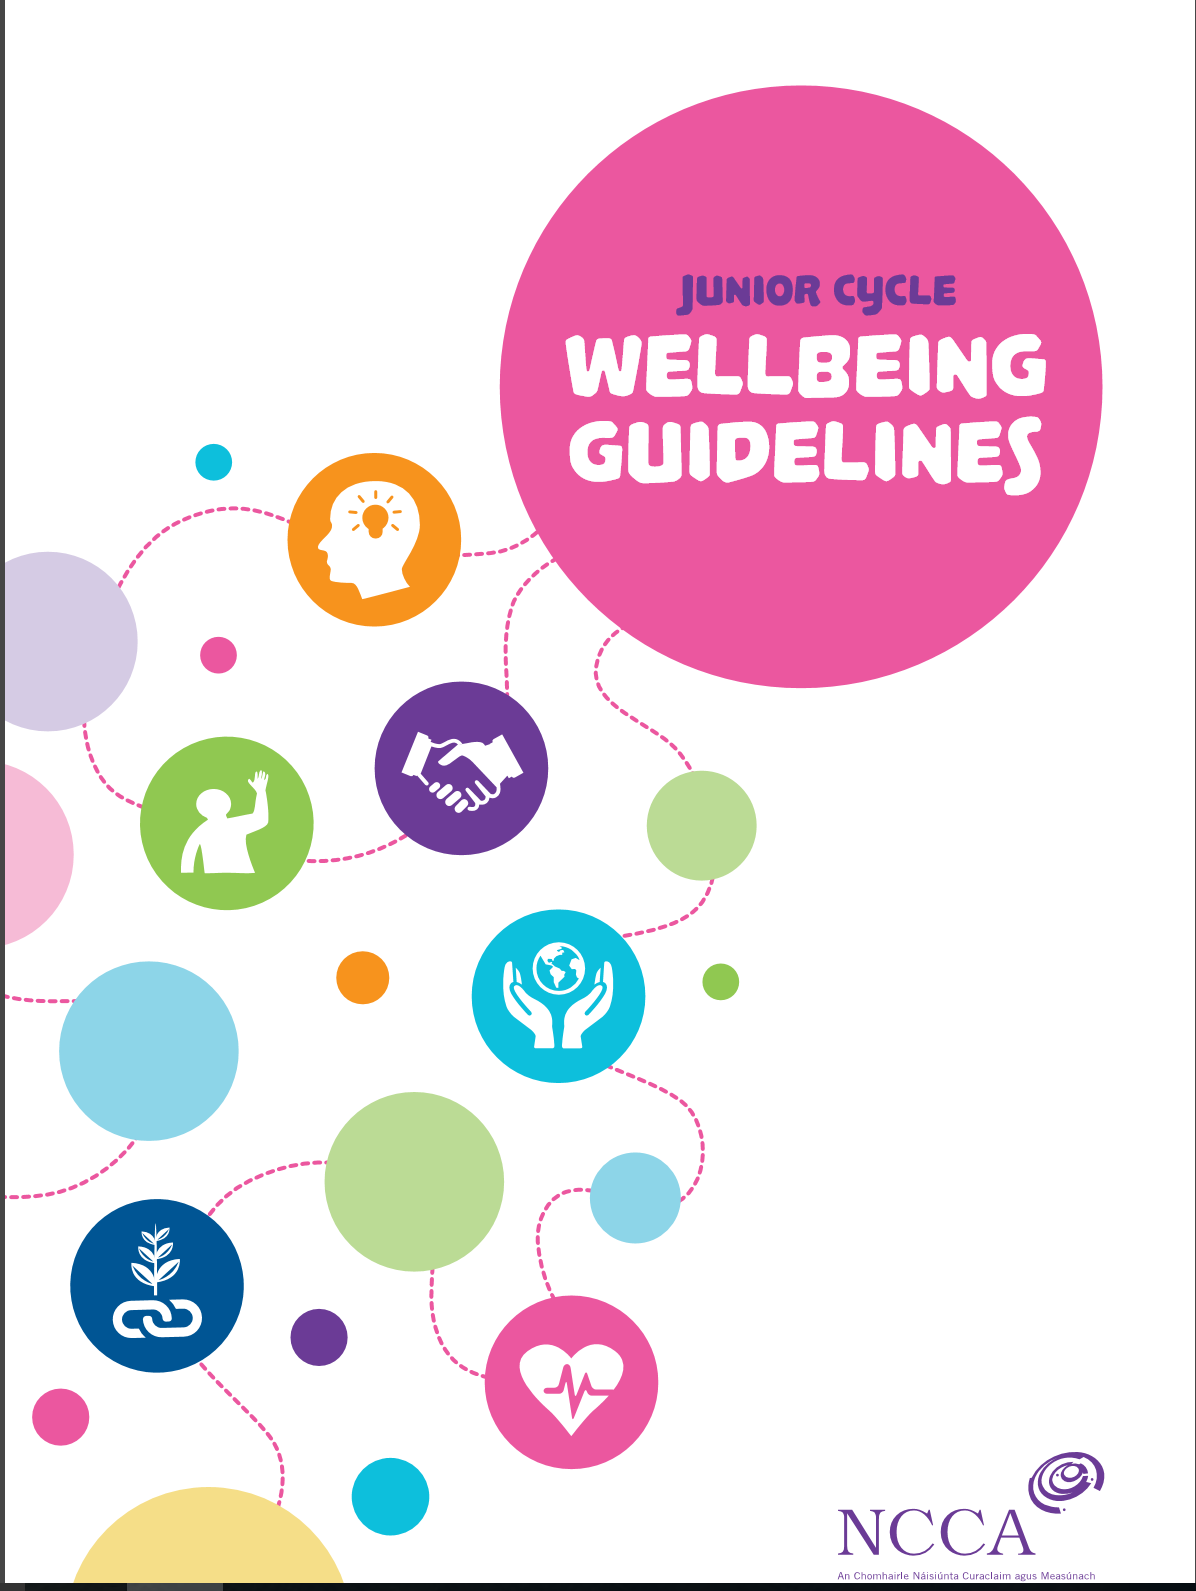 Wellbeing Guidelines for Junior Cycle